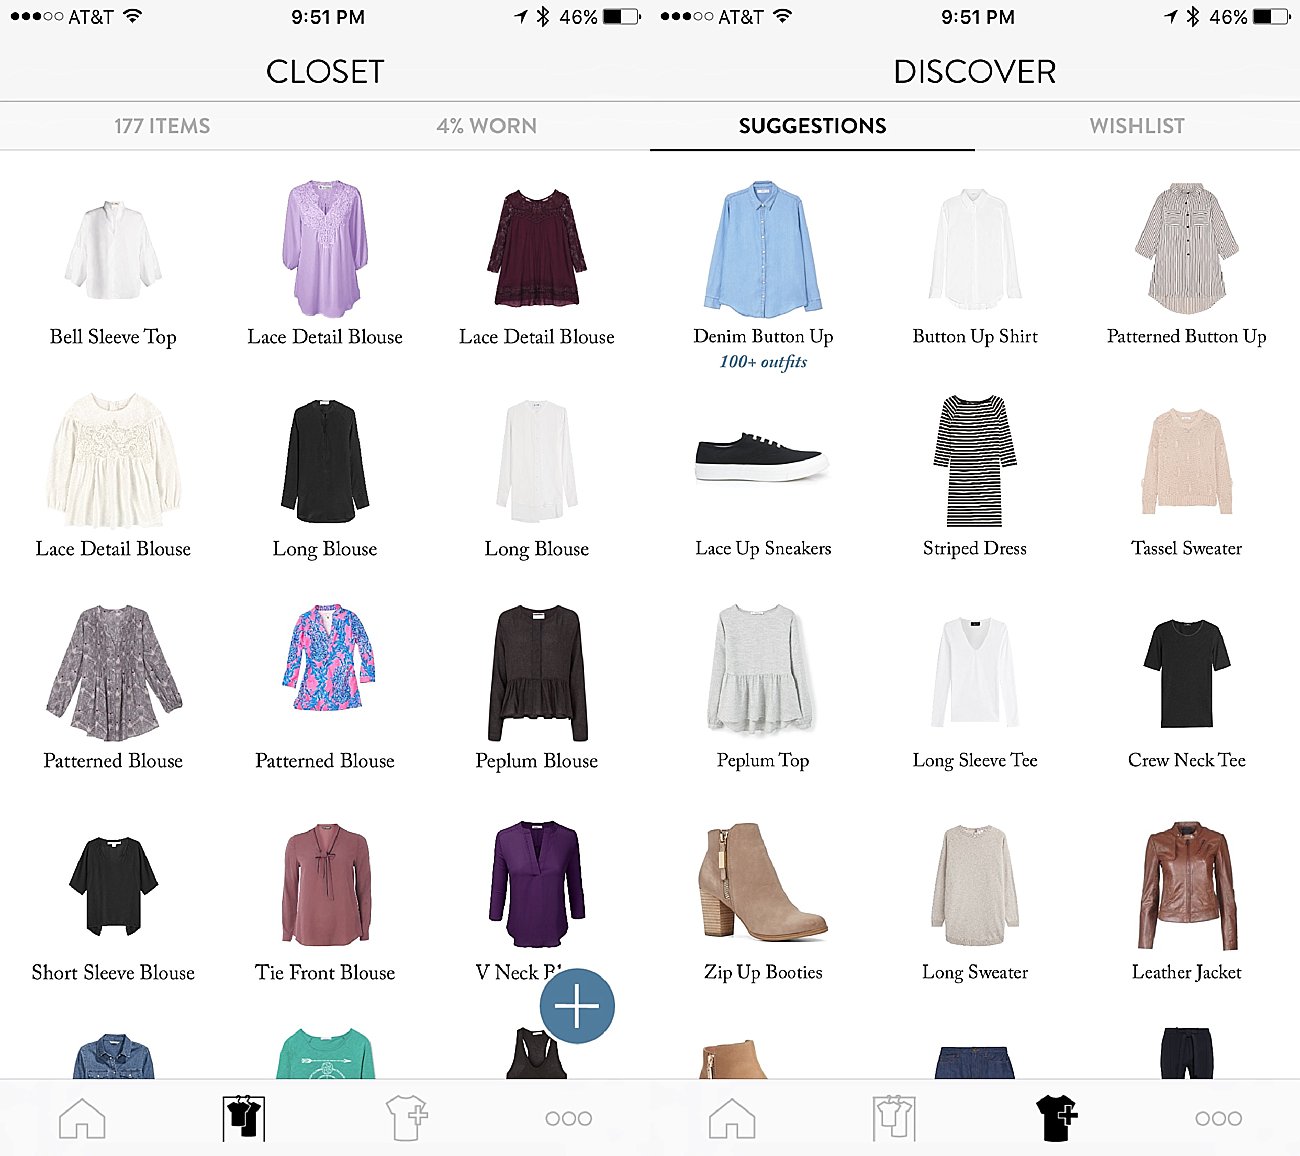 Take the Time : My Obsession with the new "Outfits" by Cladwell Wardrobe App by fashion blogger Still Being Molly